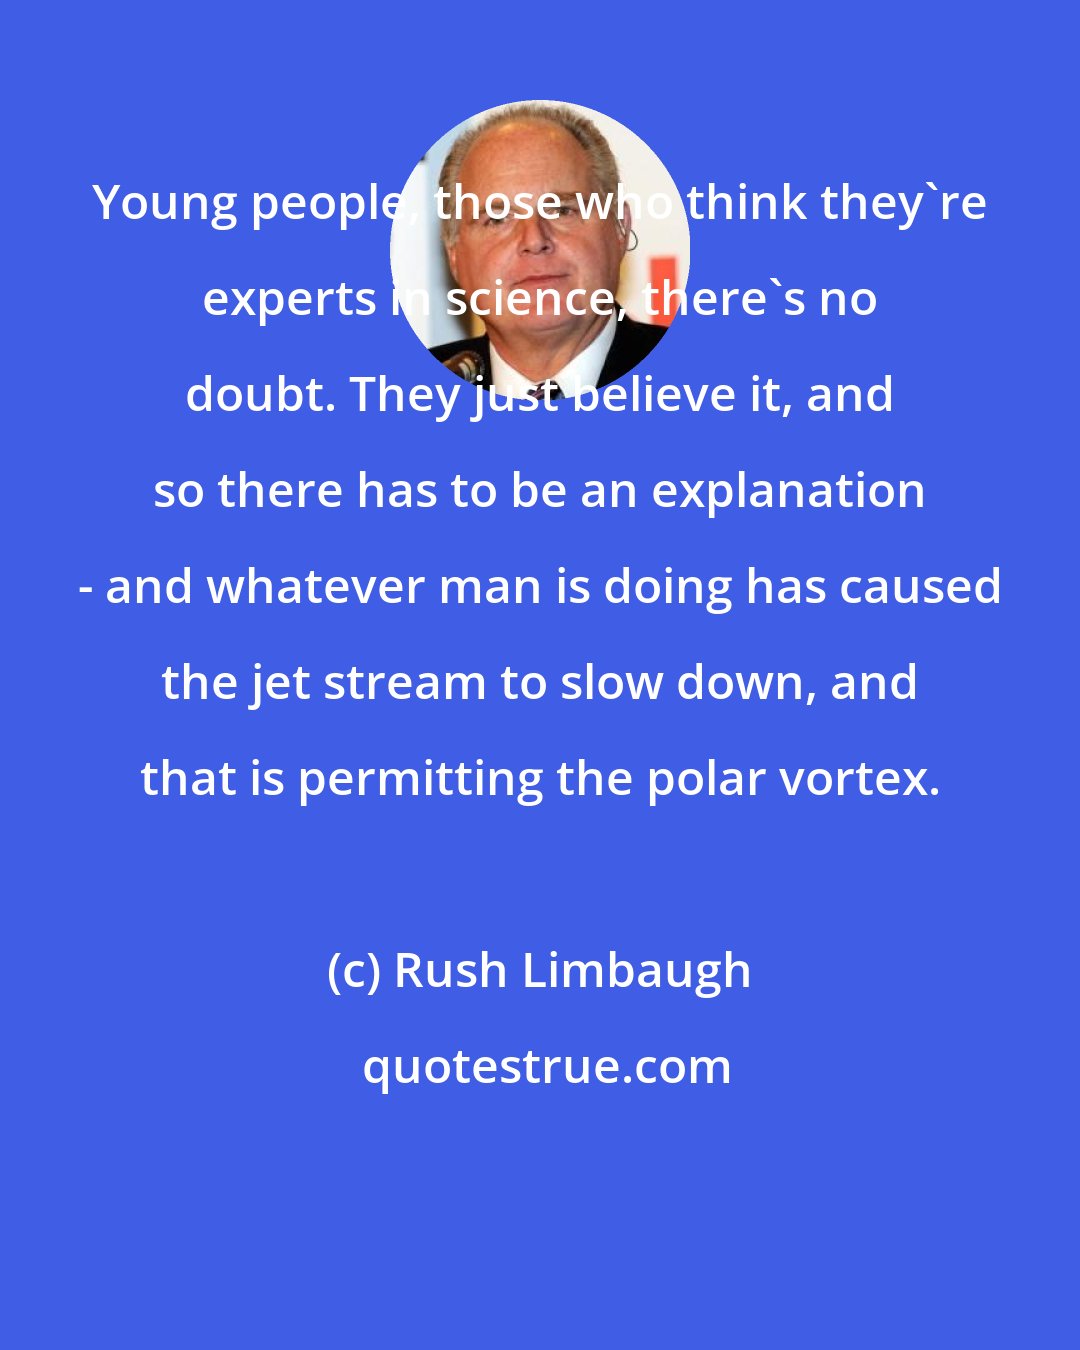 Rush Limbaugh: Young people, those who think they're experts in science, there's no doubt. They just believe it, and so there has to be an explanation - and whatever man is doing has caused the jet stream to slow down, and that is permitting the polar vortex.